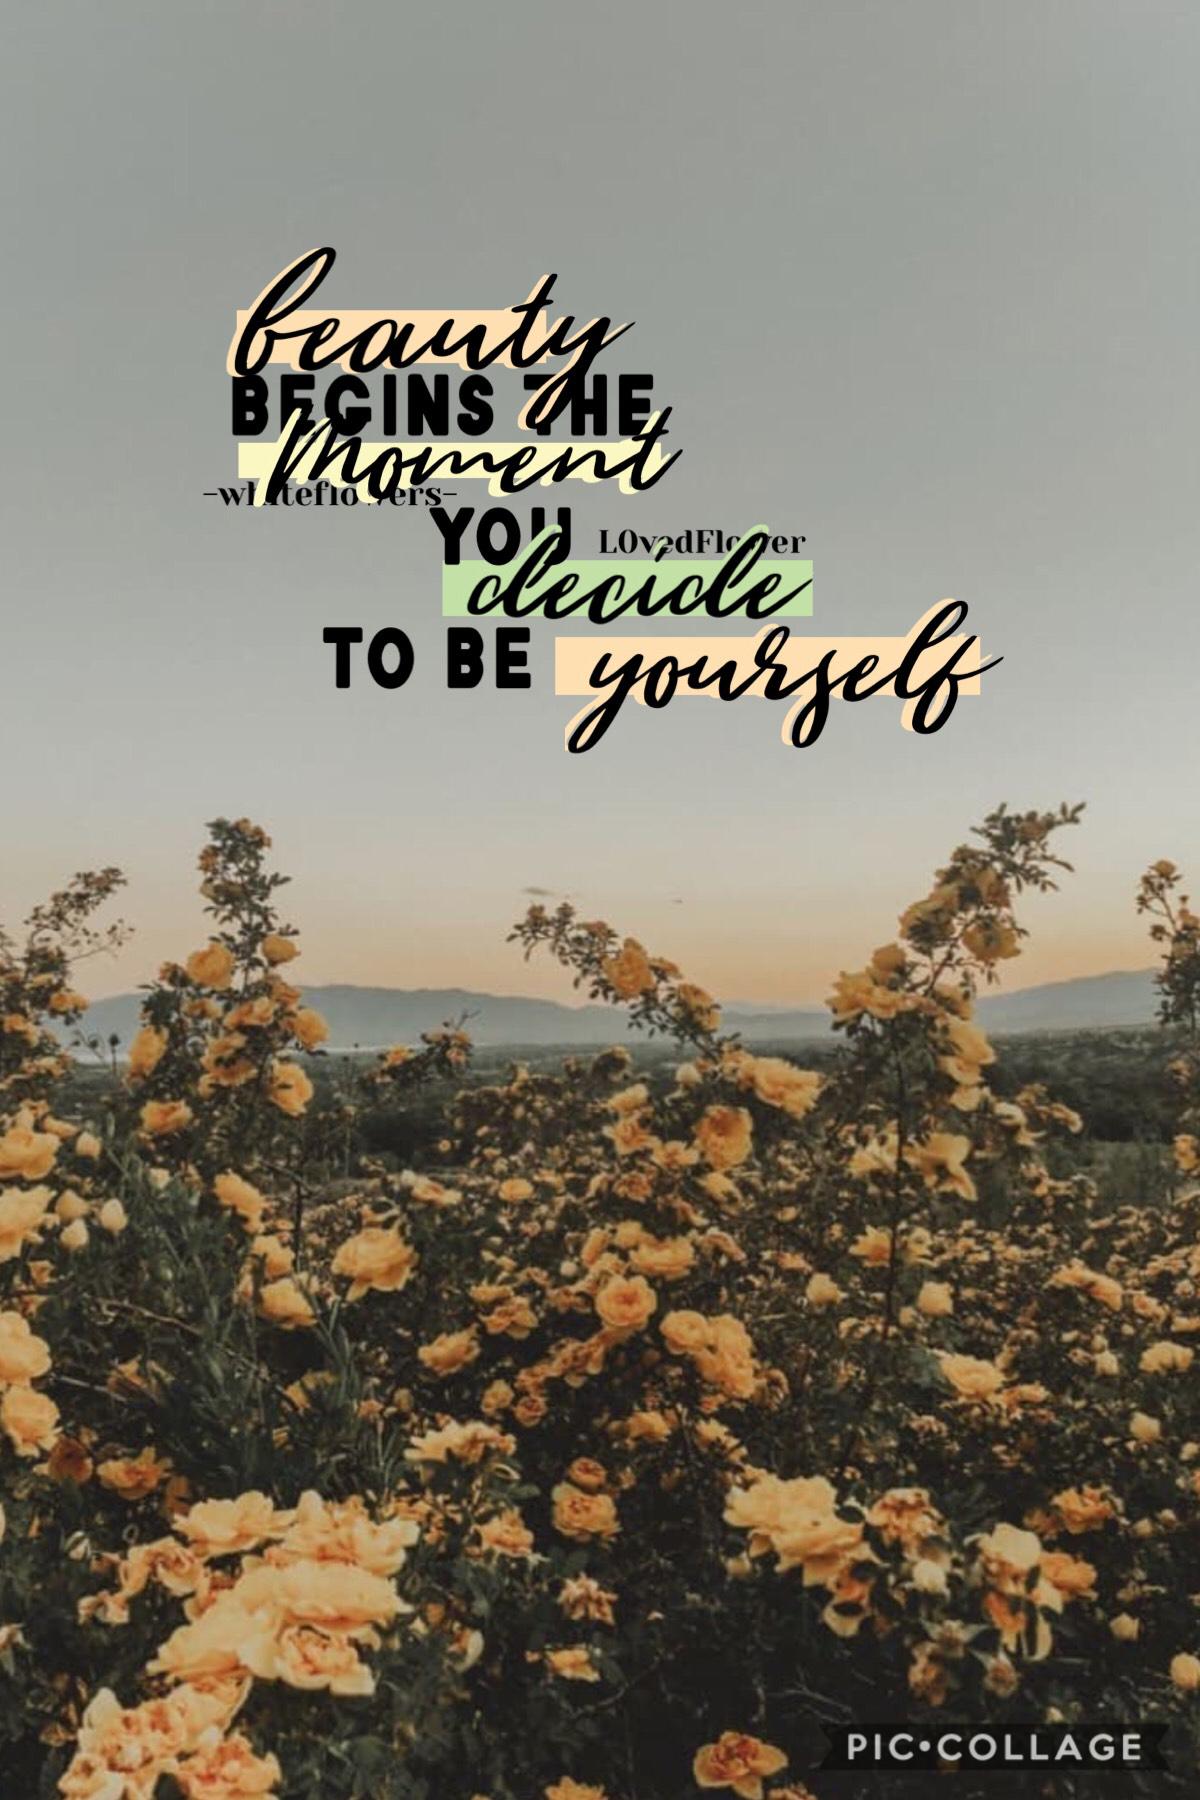 [ click ]
Collab with the amazing, kind -whiteflowers-
She found the background and quote and
I did the text.
Hope you all like this💛